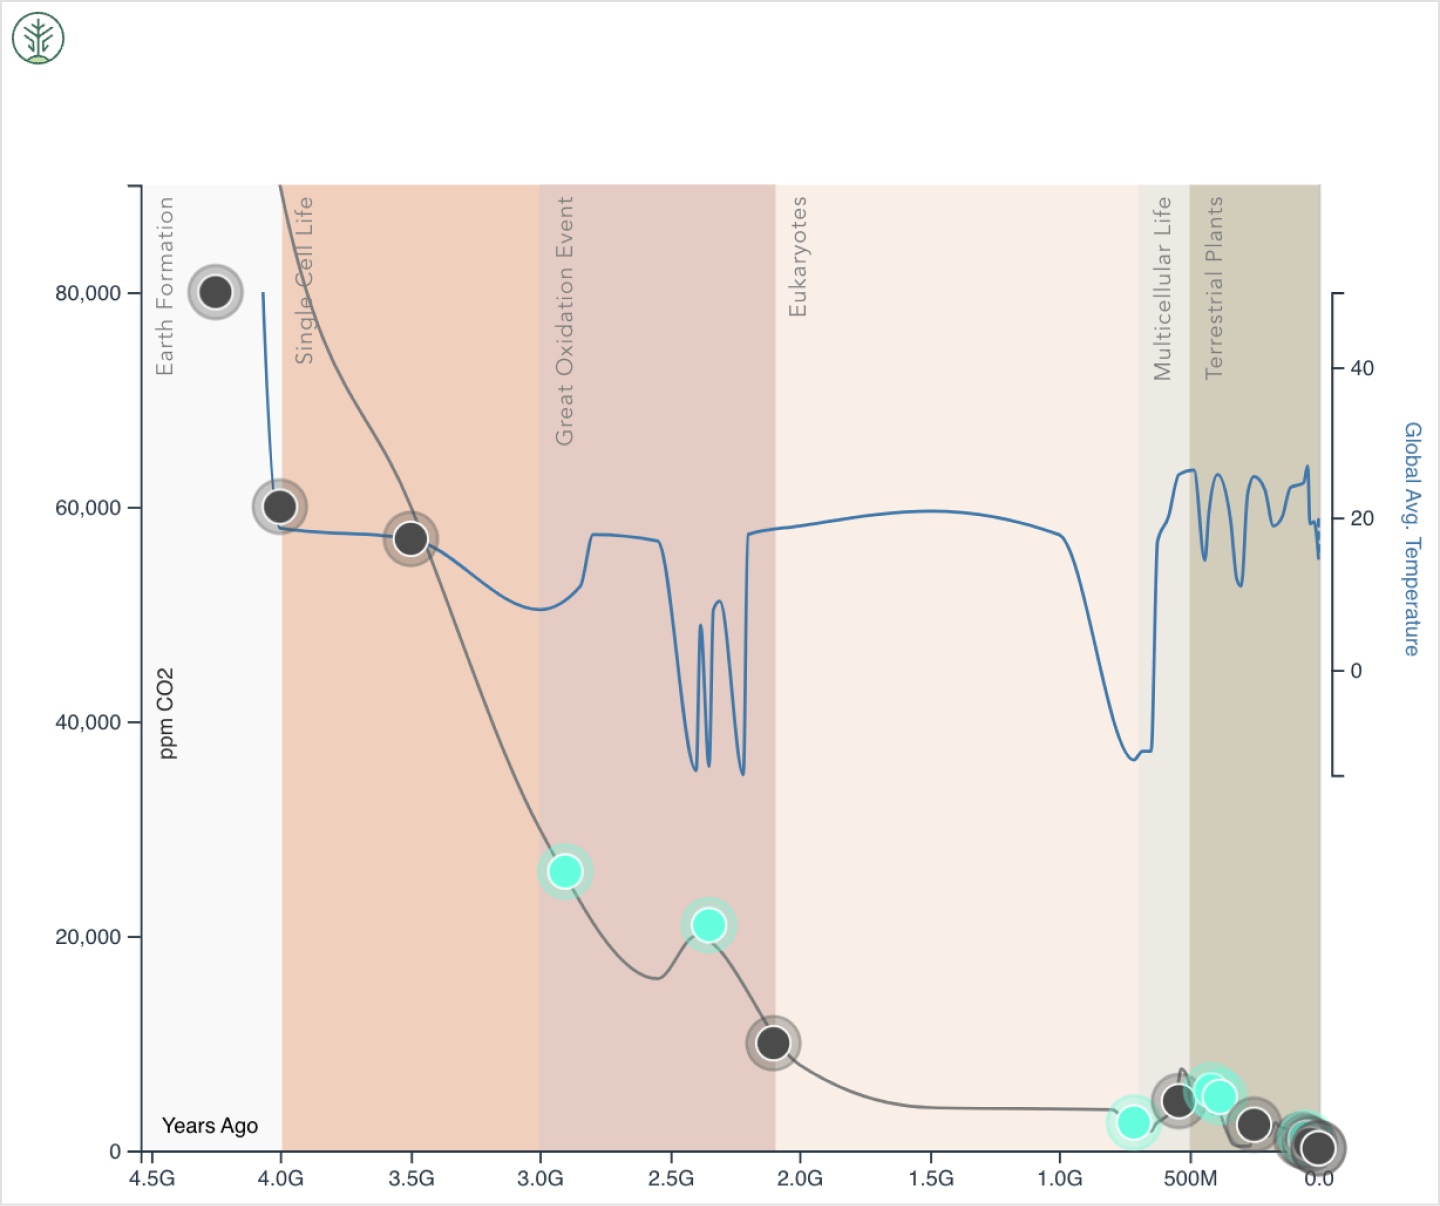 Snapshot from Living Carbon's deep time project, showing a graph of the earth's history